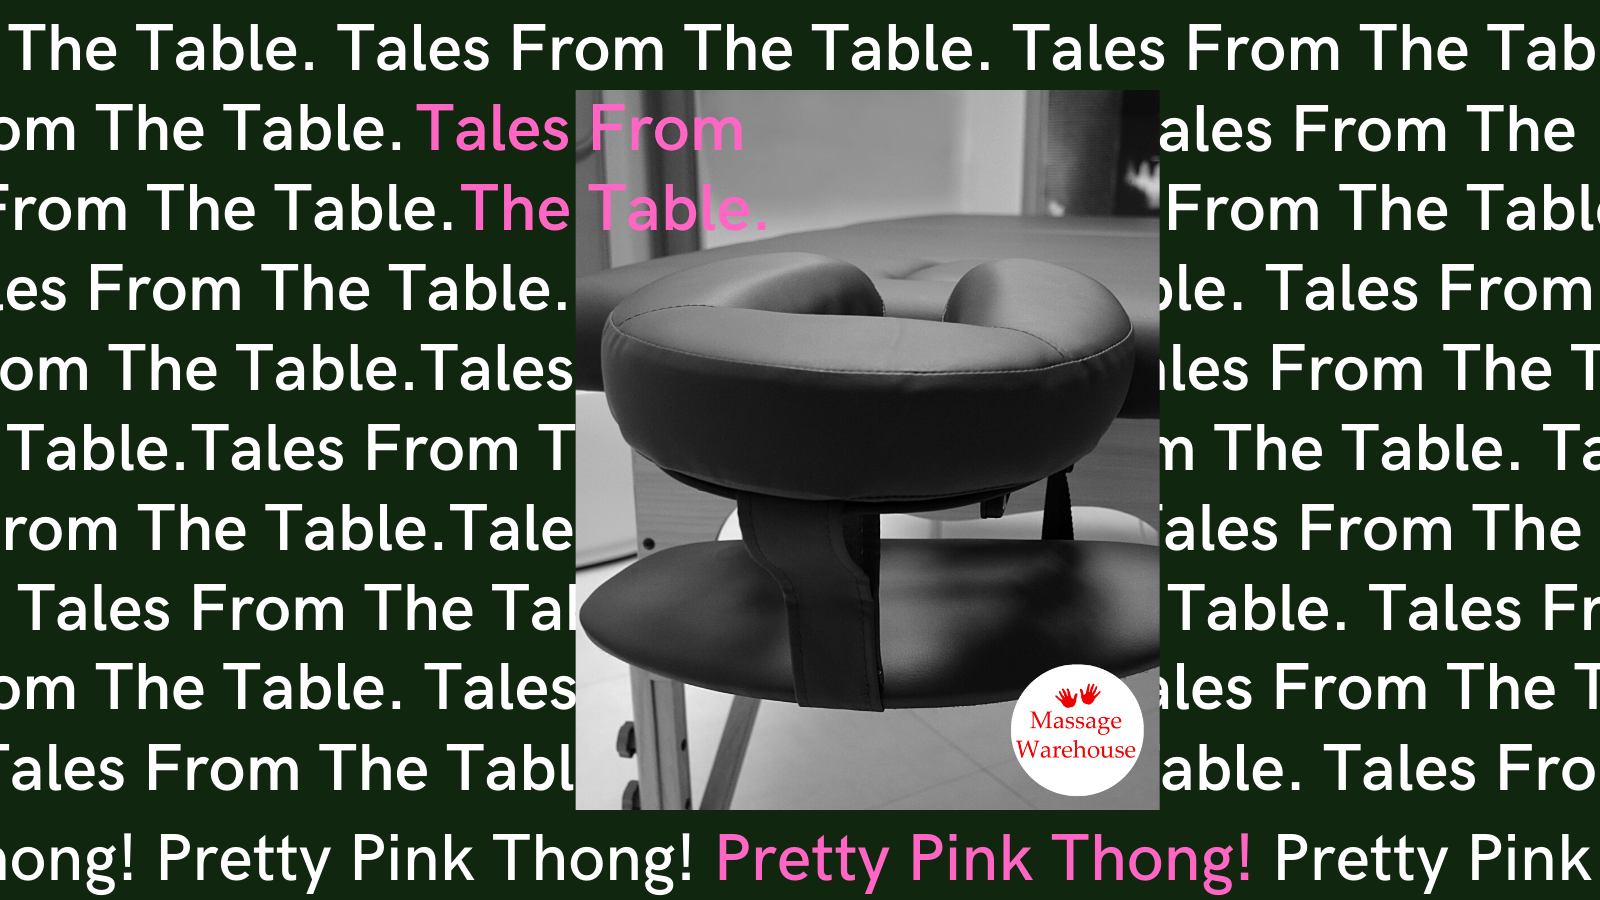 Tales from the Table - Pretty Pink Thong